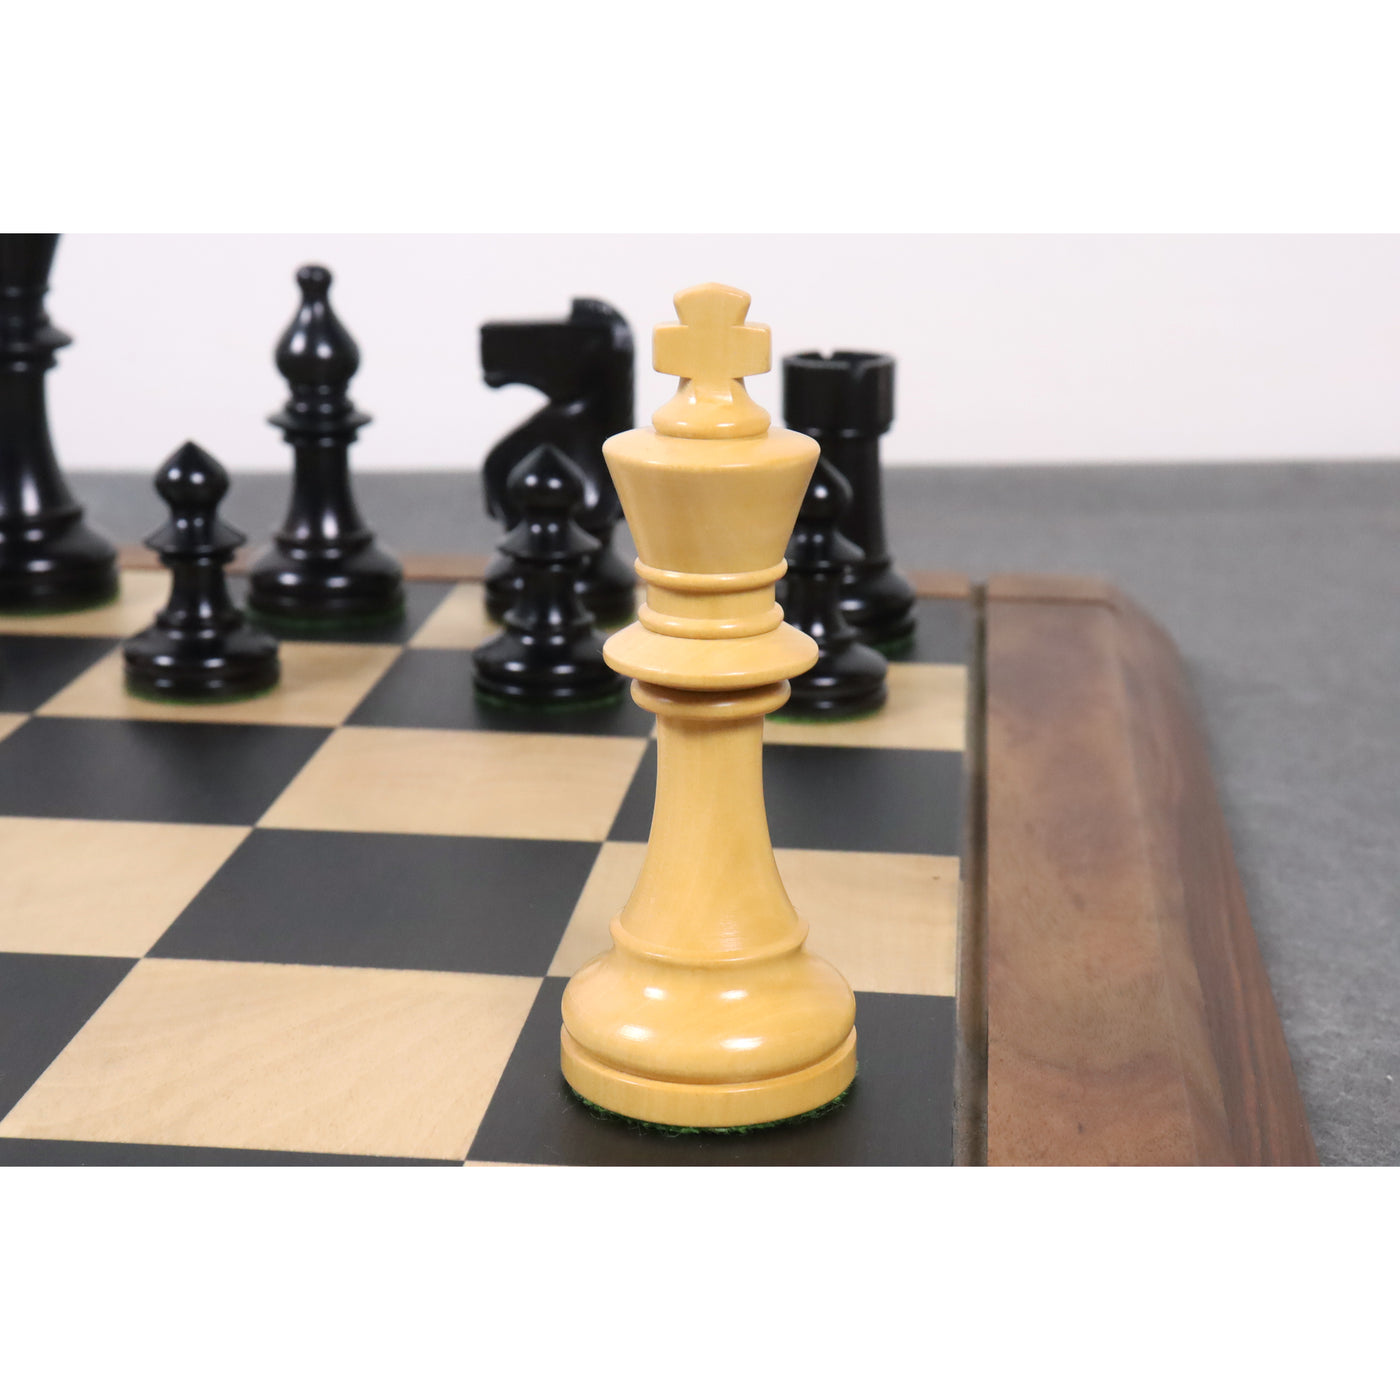 Reproduced W. T. Pinney Staunton Chess Pieces only set